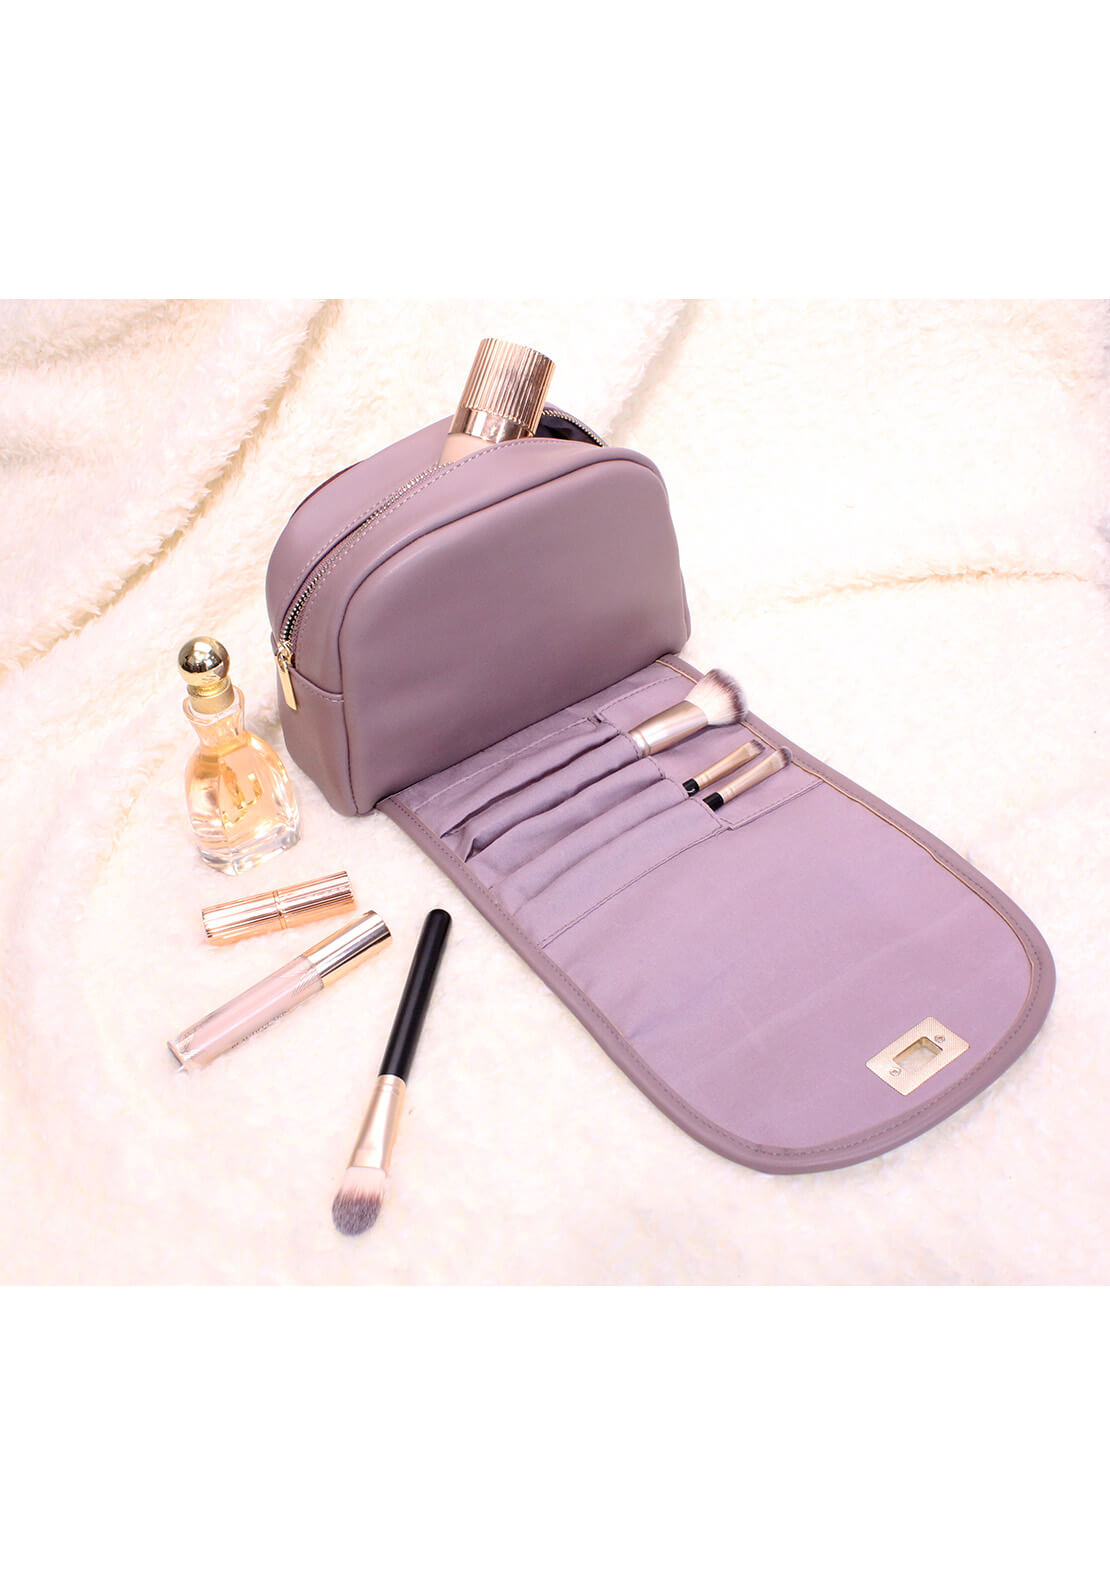 Brandwell Cosmetic Case With Brush Section 1 Shaws Department Stores